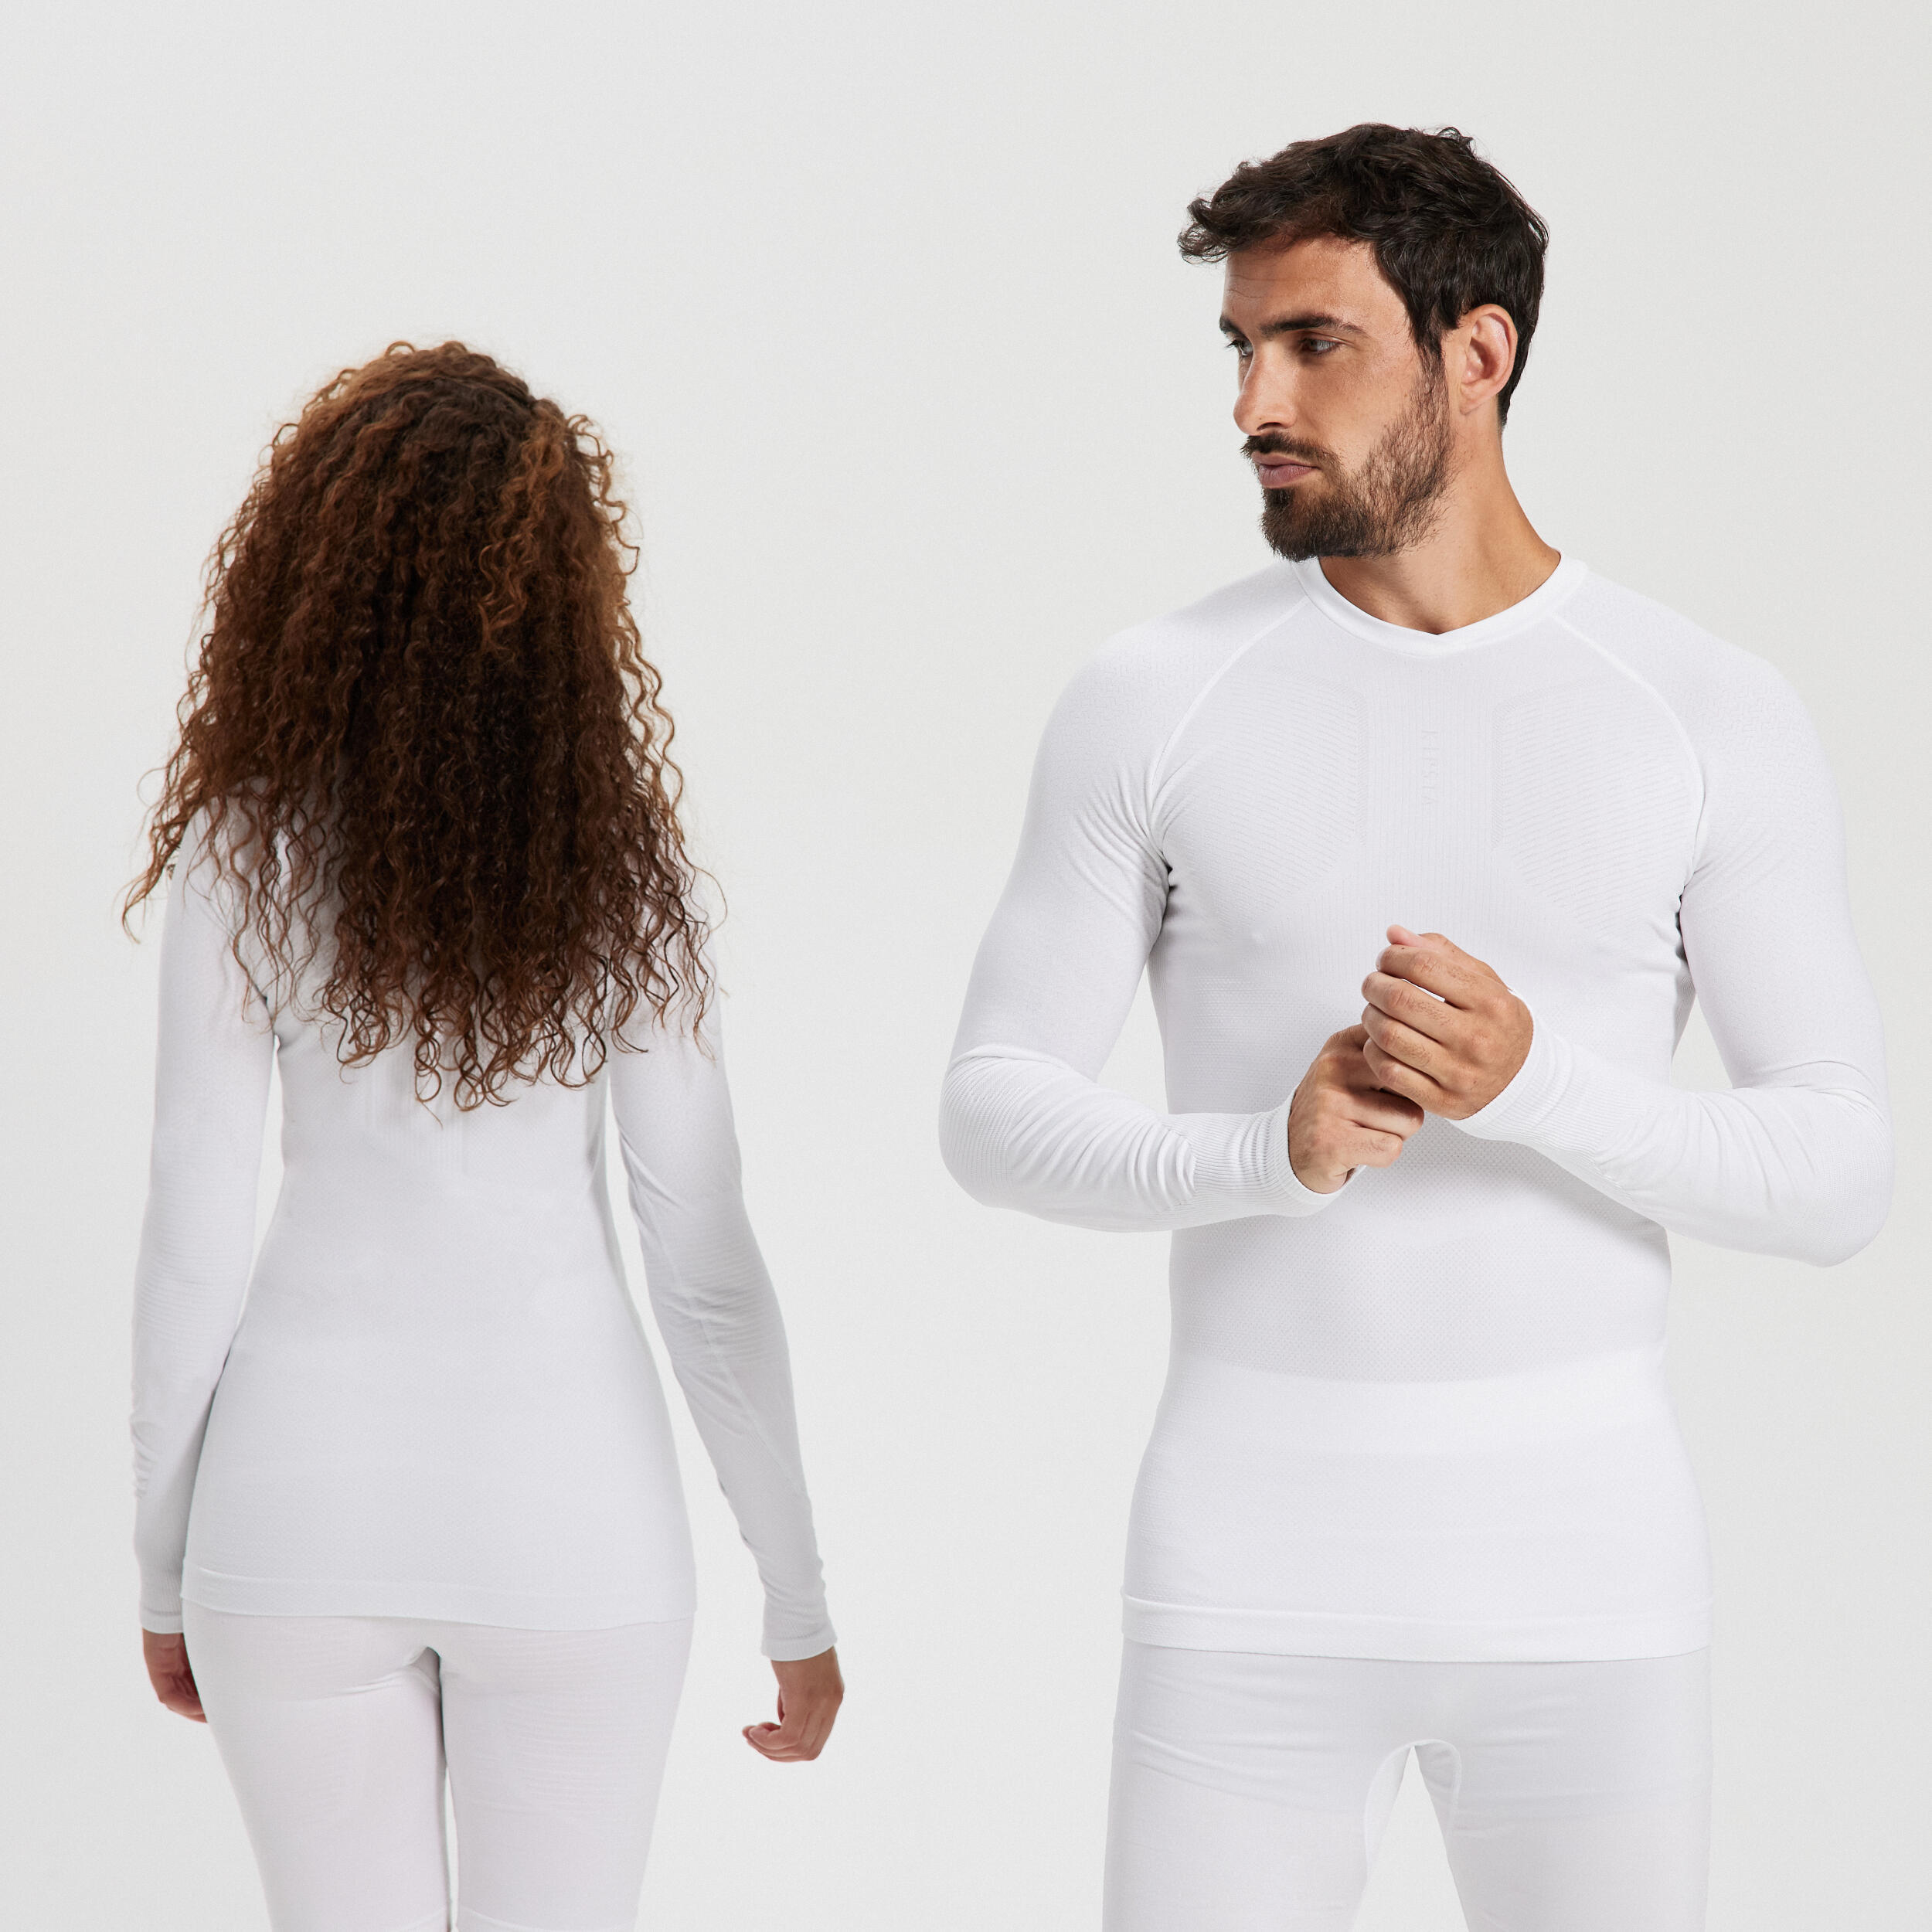 Adult Long-Sleeved Thermal Base Layer Top Keepdry 500 - White 3/13